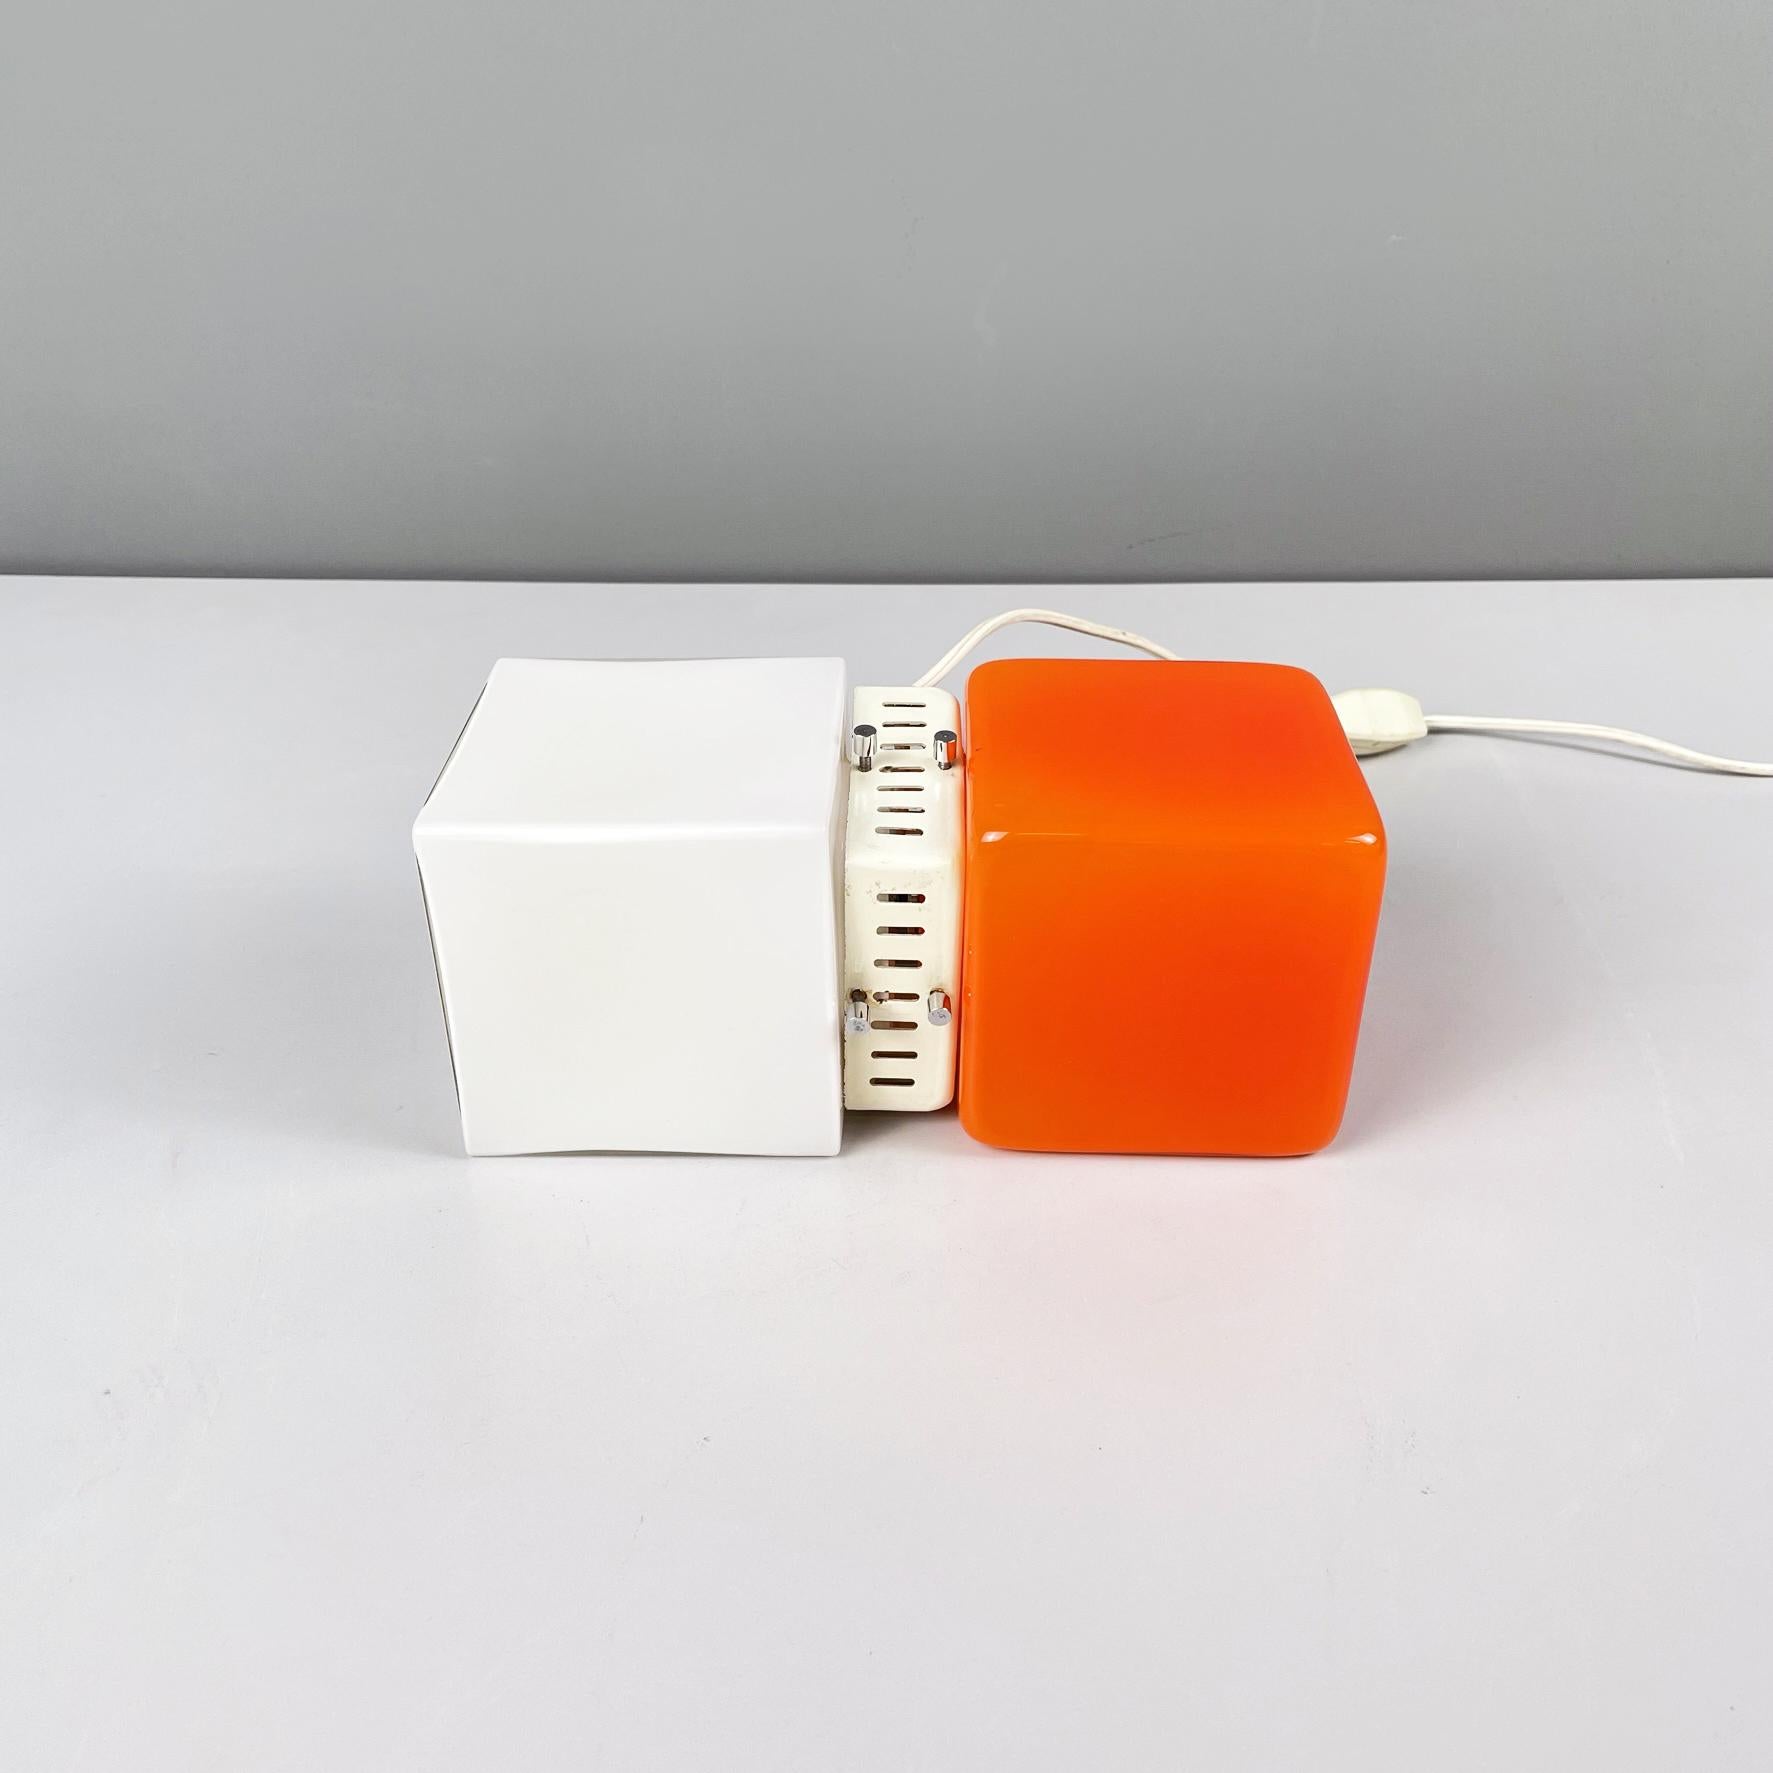 Italian space age Table lamp in orange and opaline glass with white metal, 1970s
Fantastic and vintage table lamp with double square diffuser in opaline glass on one side and bright orange glass on the other. The center is a cream white painted